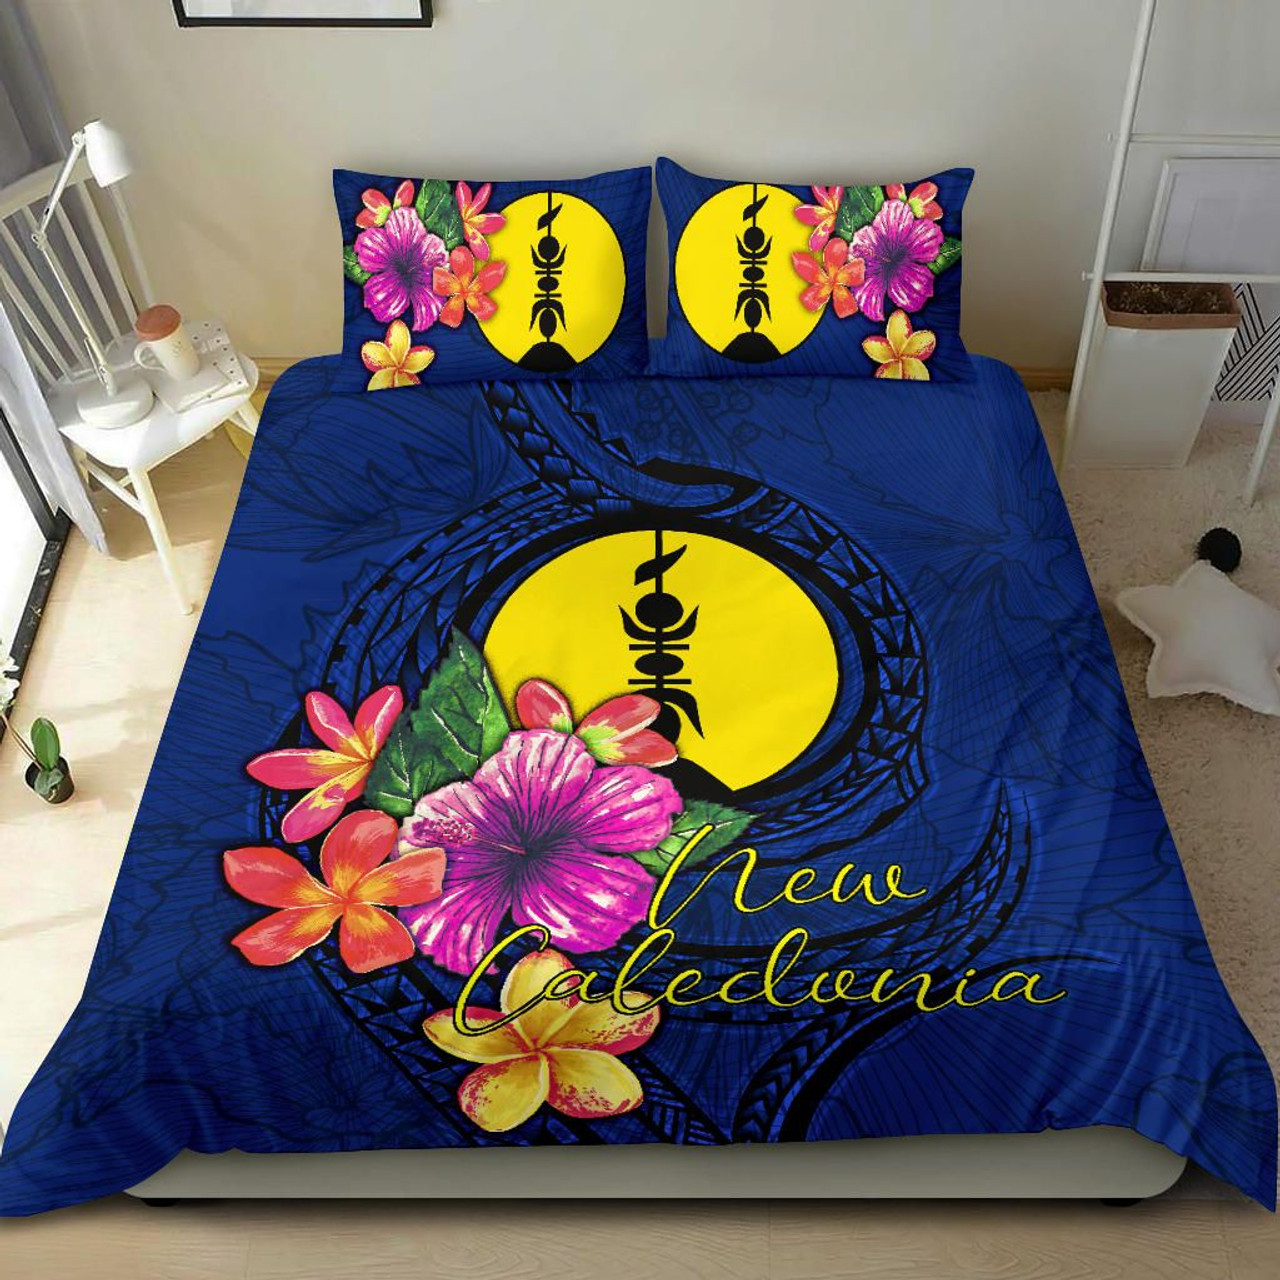 Polynesian Bedding Set - New Caledonia Duvet Cover Set Floral With Seal Blue 2